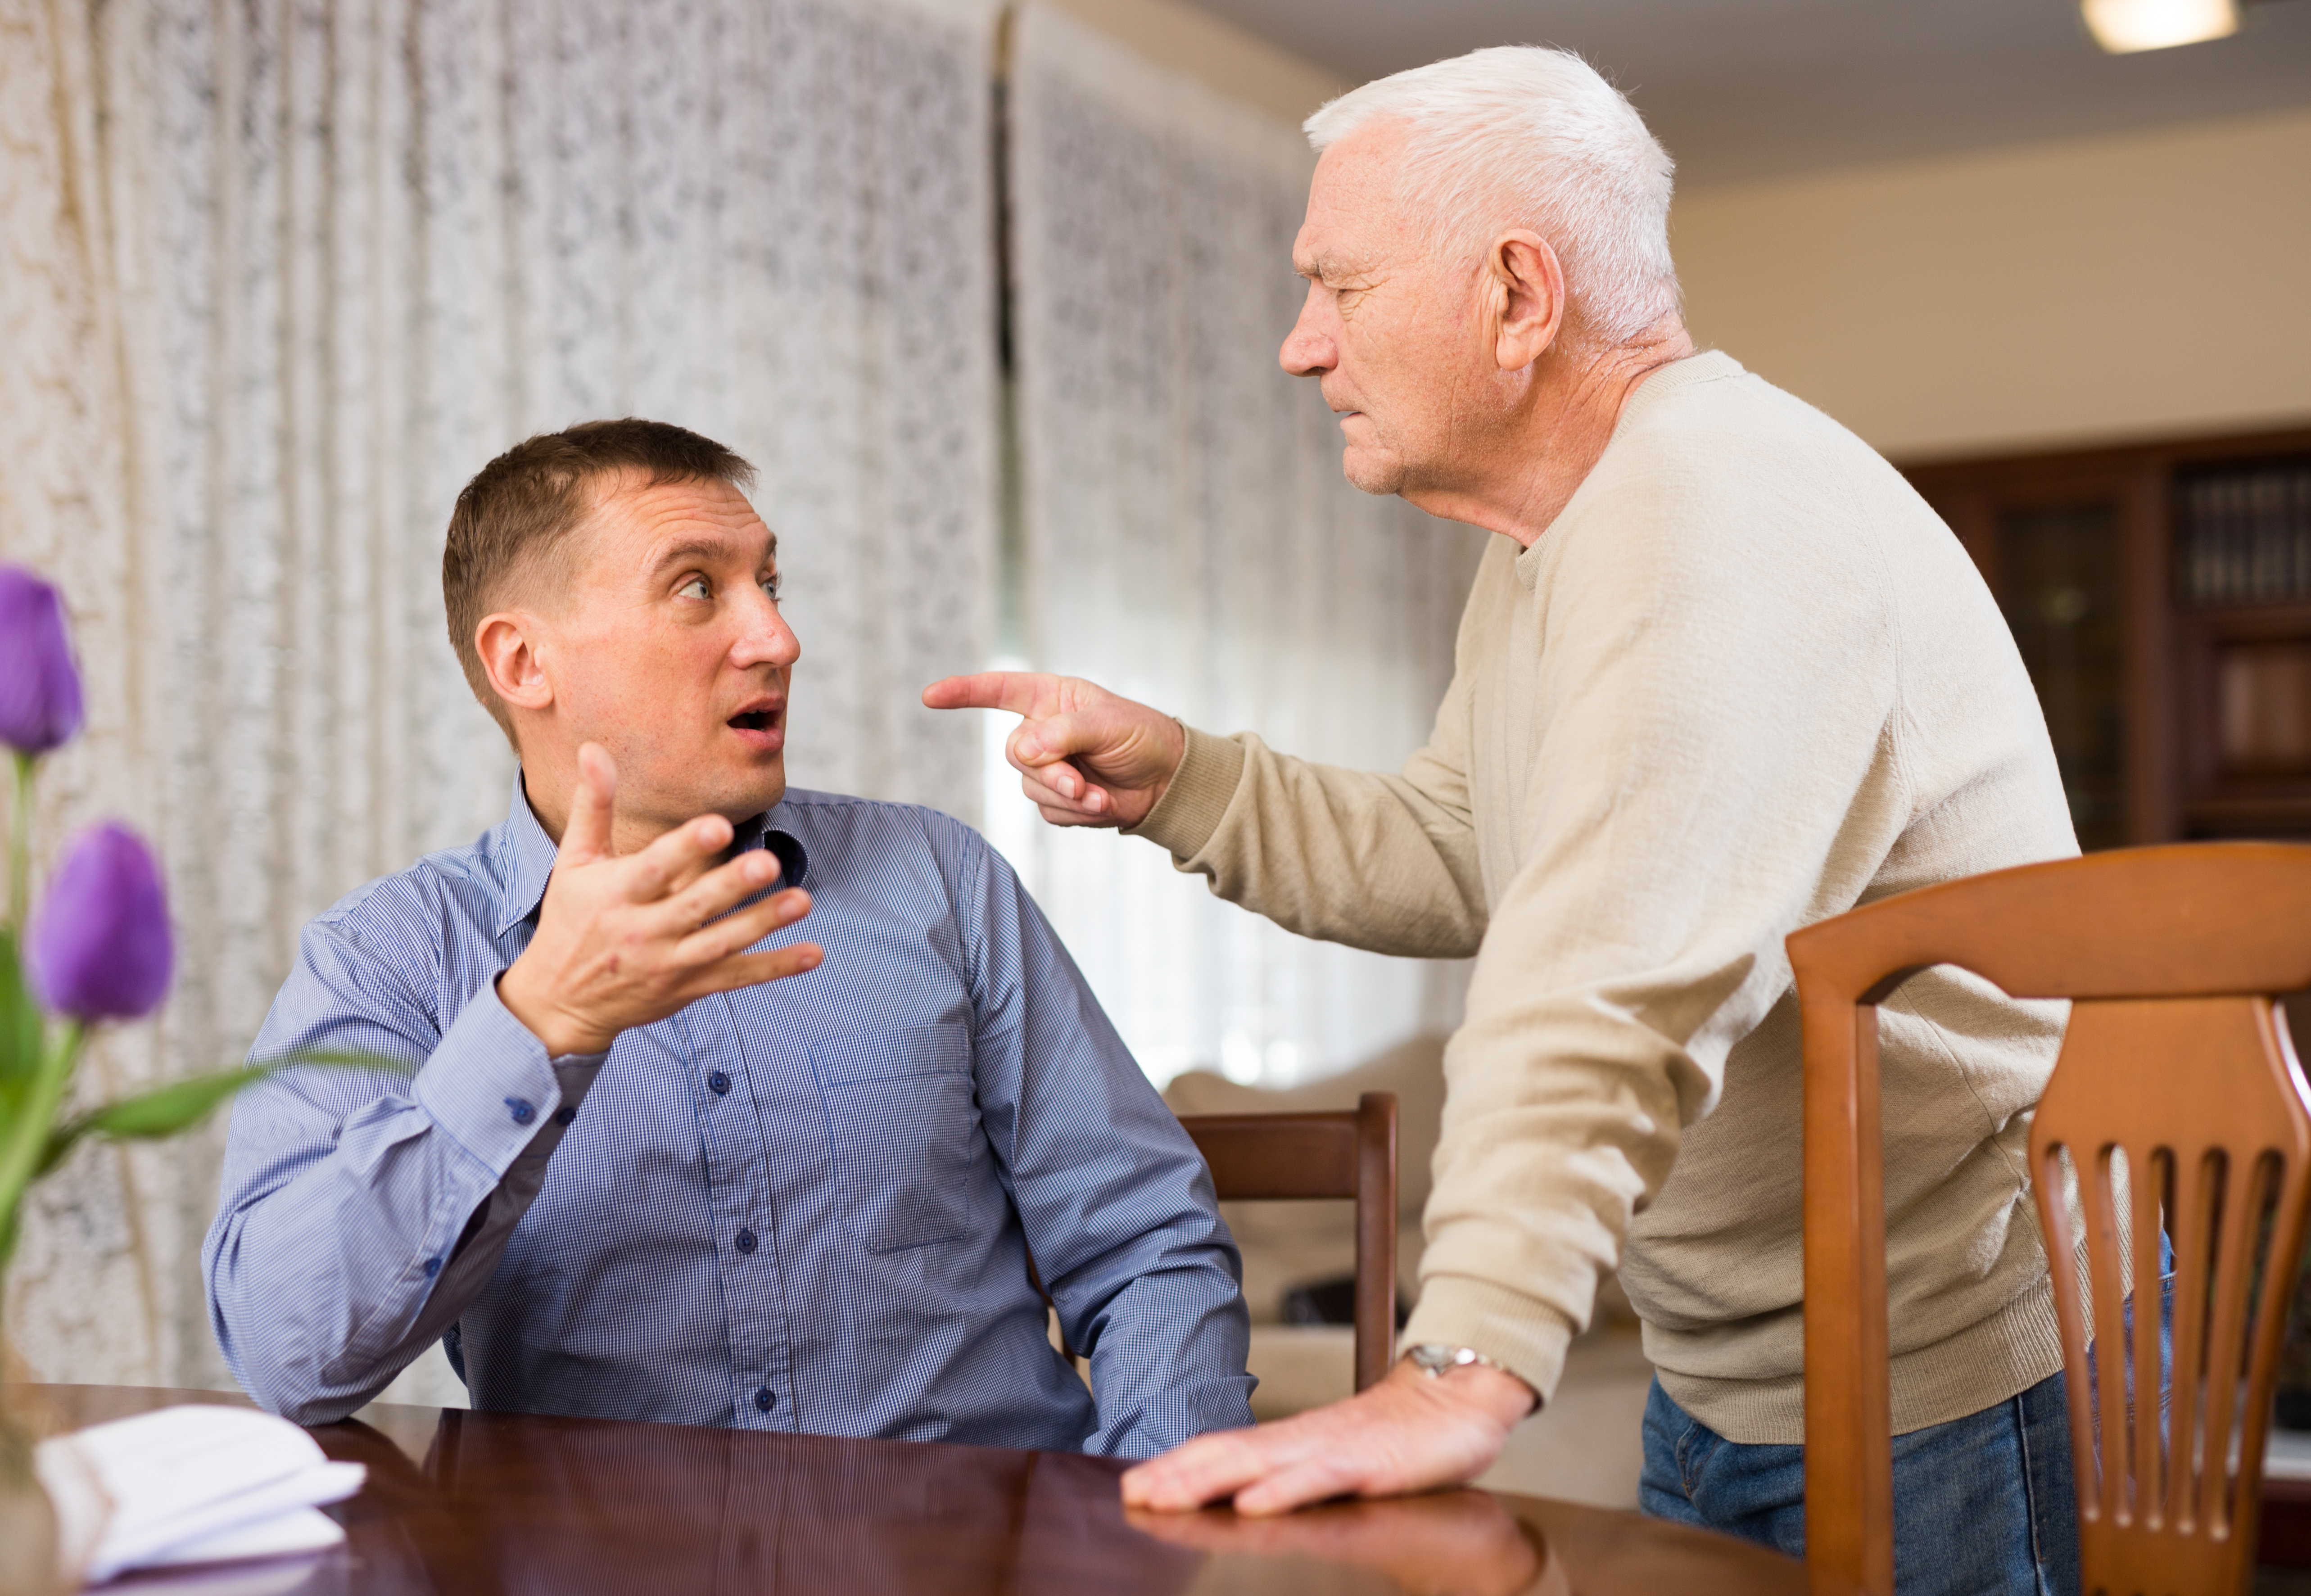 An older man and a younger man arguing | Source: Shutterstock